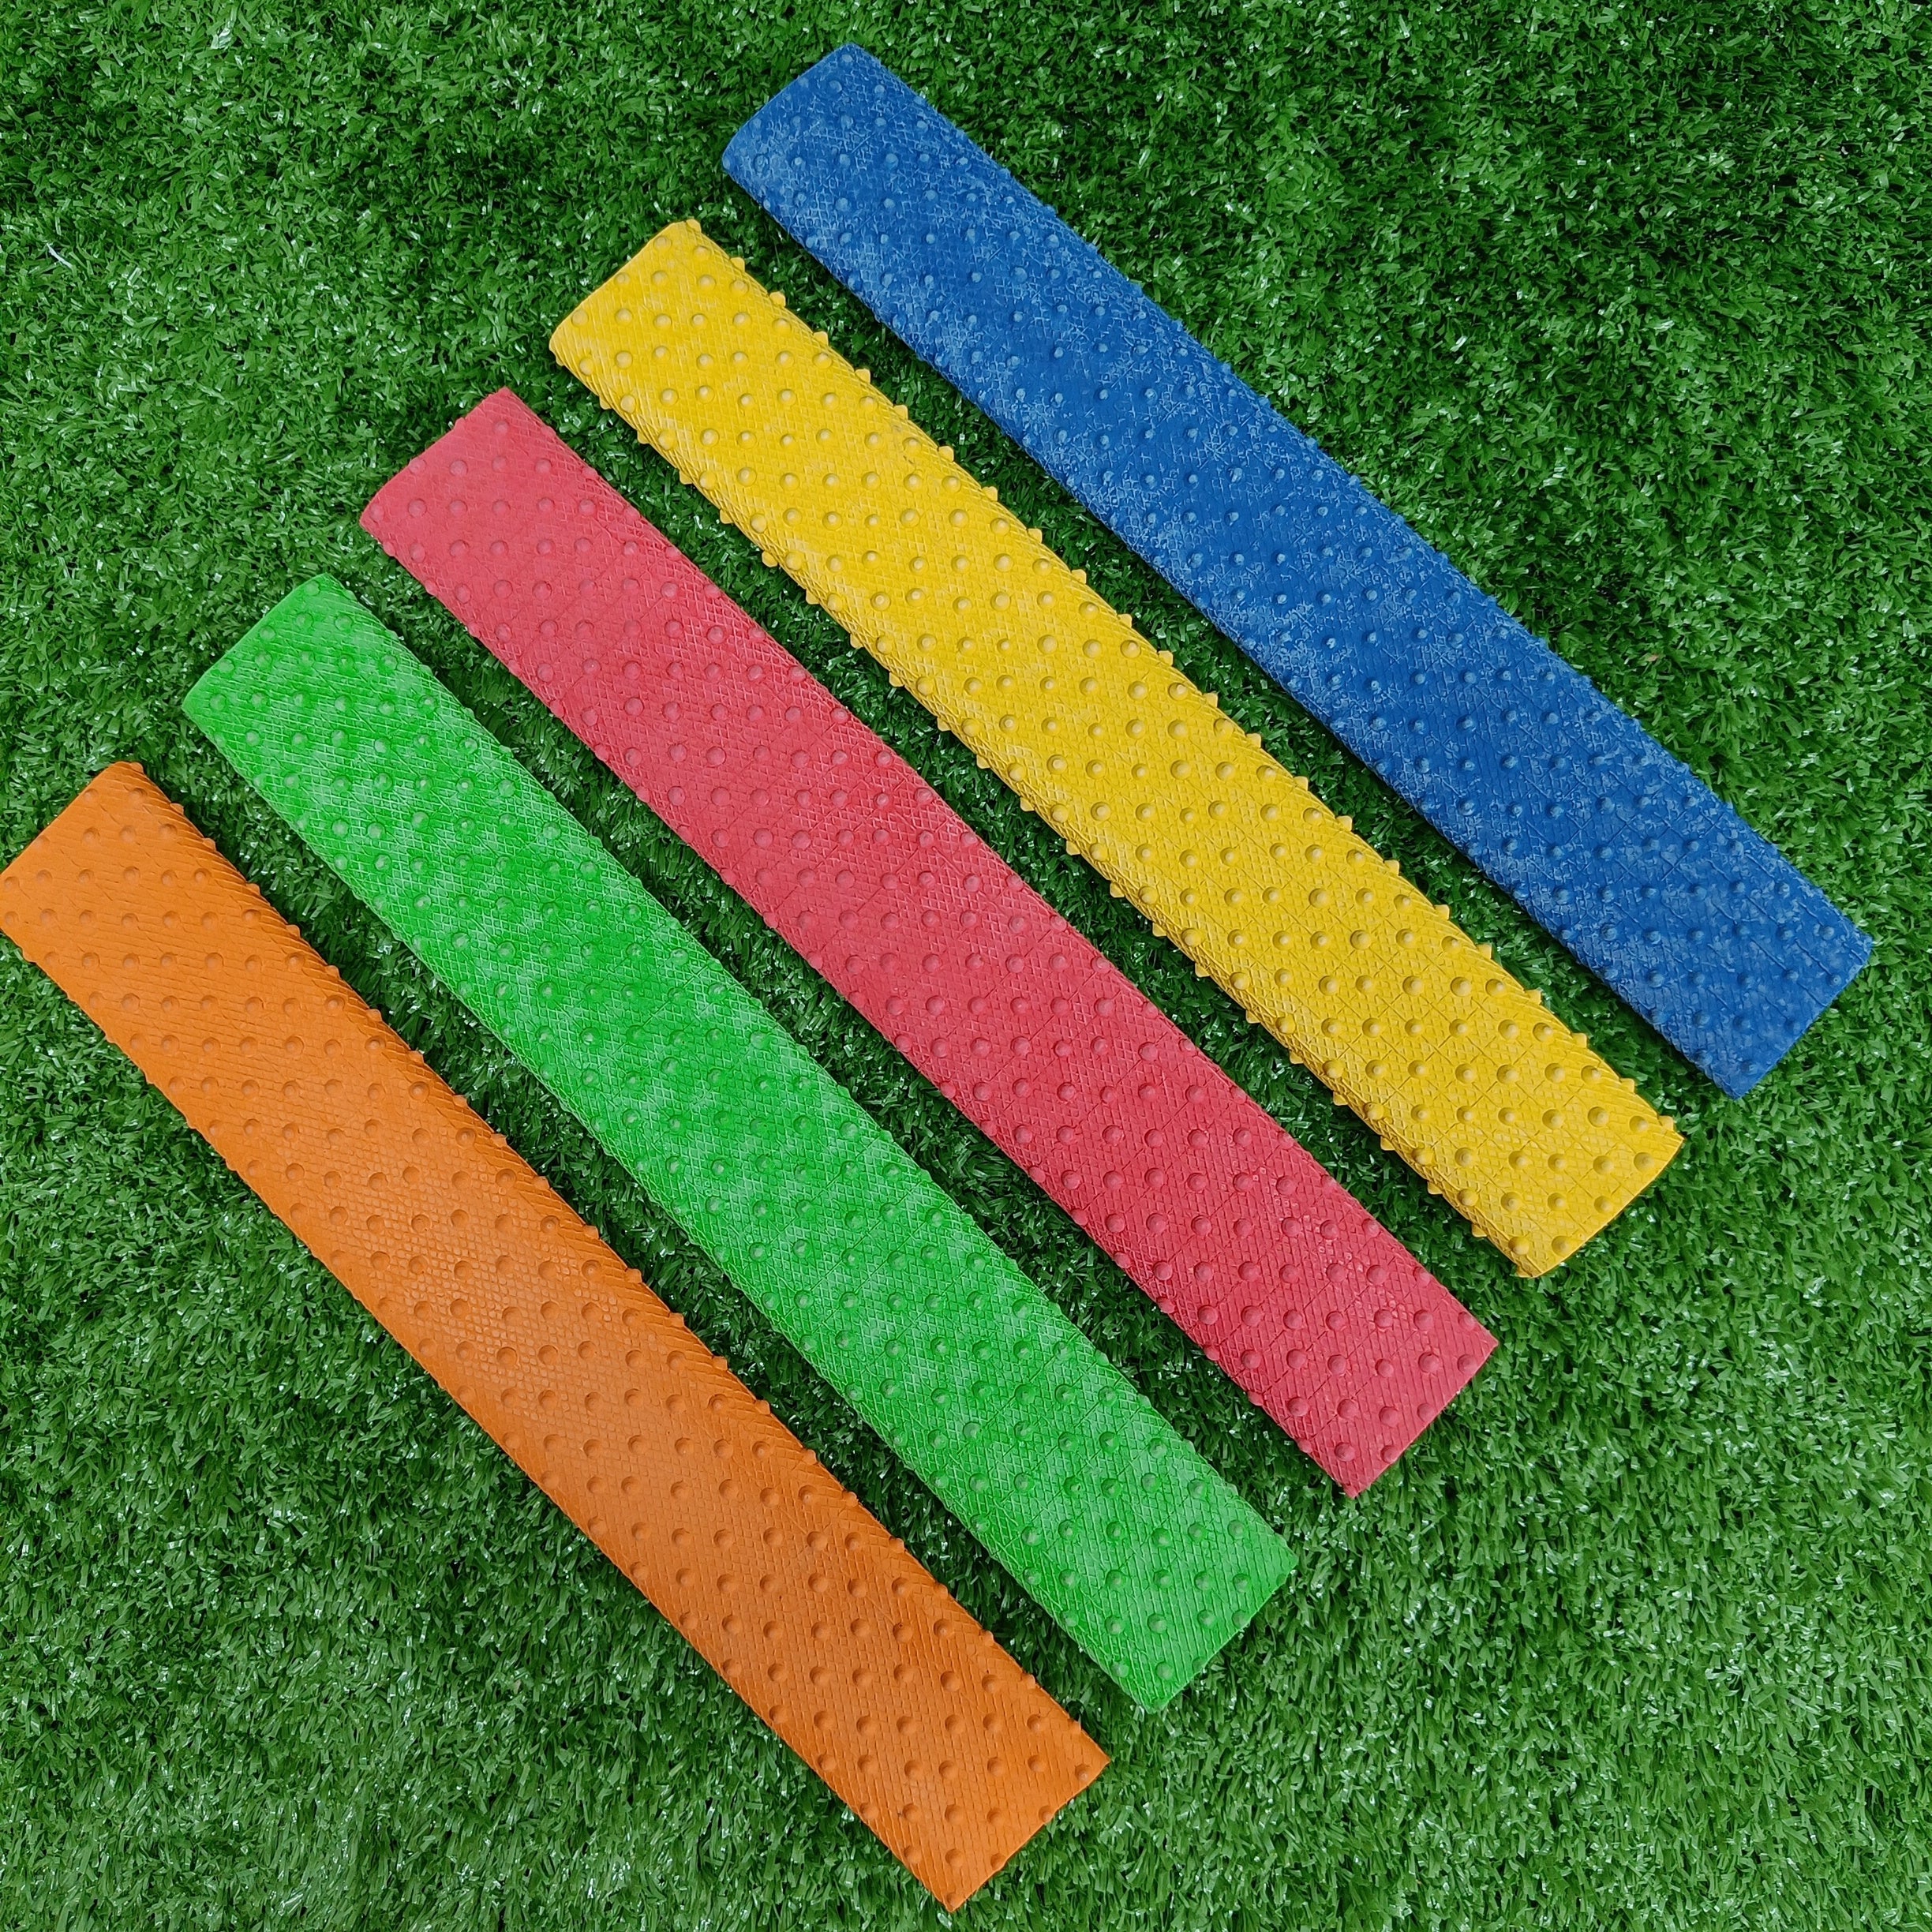 Raydn Dotted Multi Colored Cricket Grip